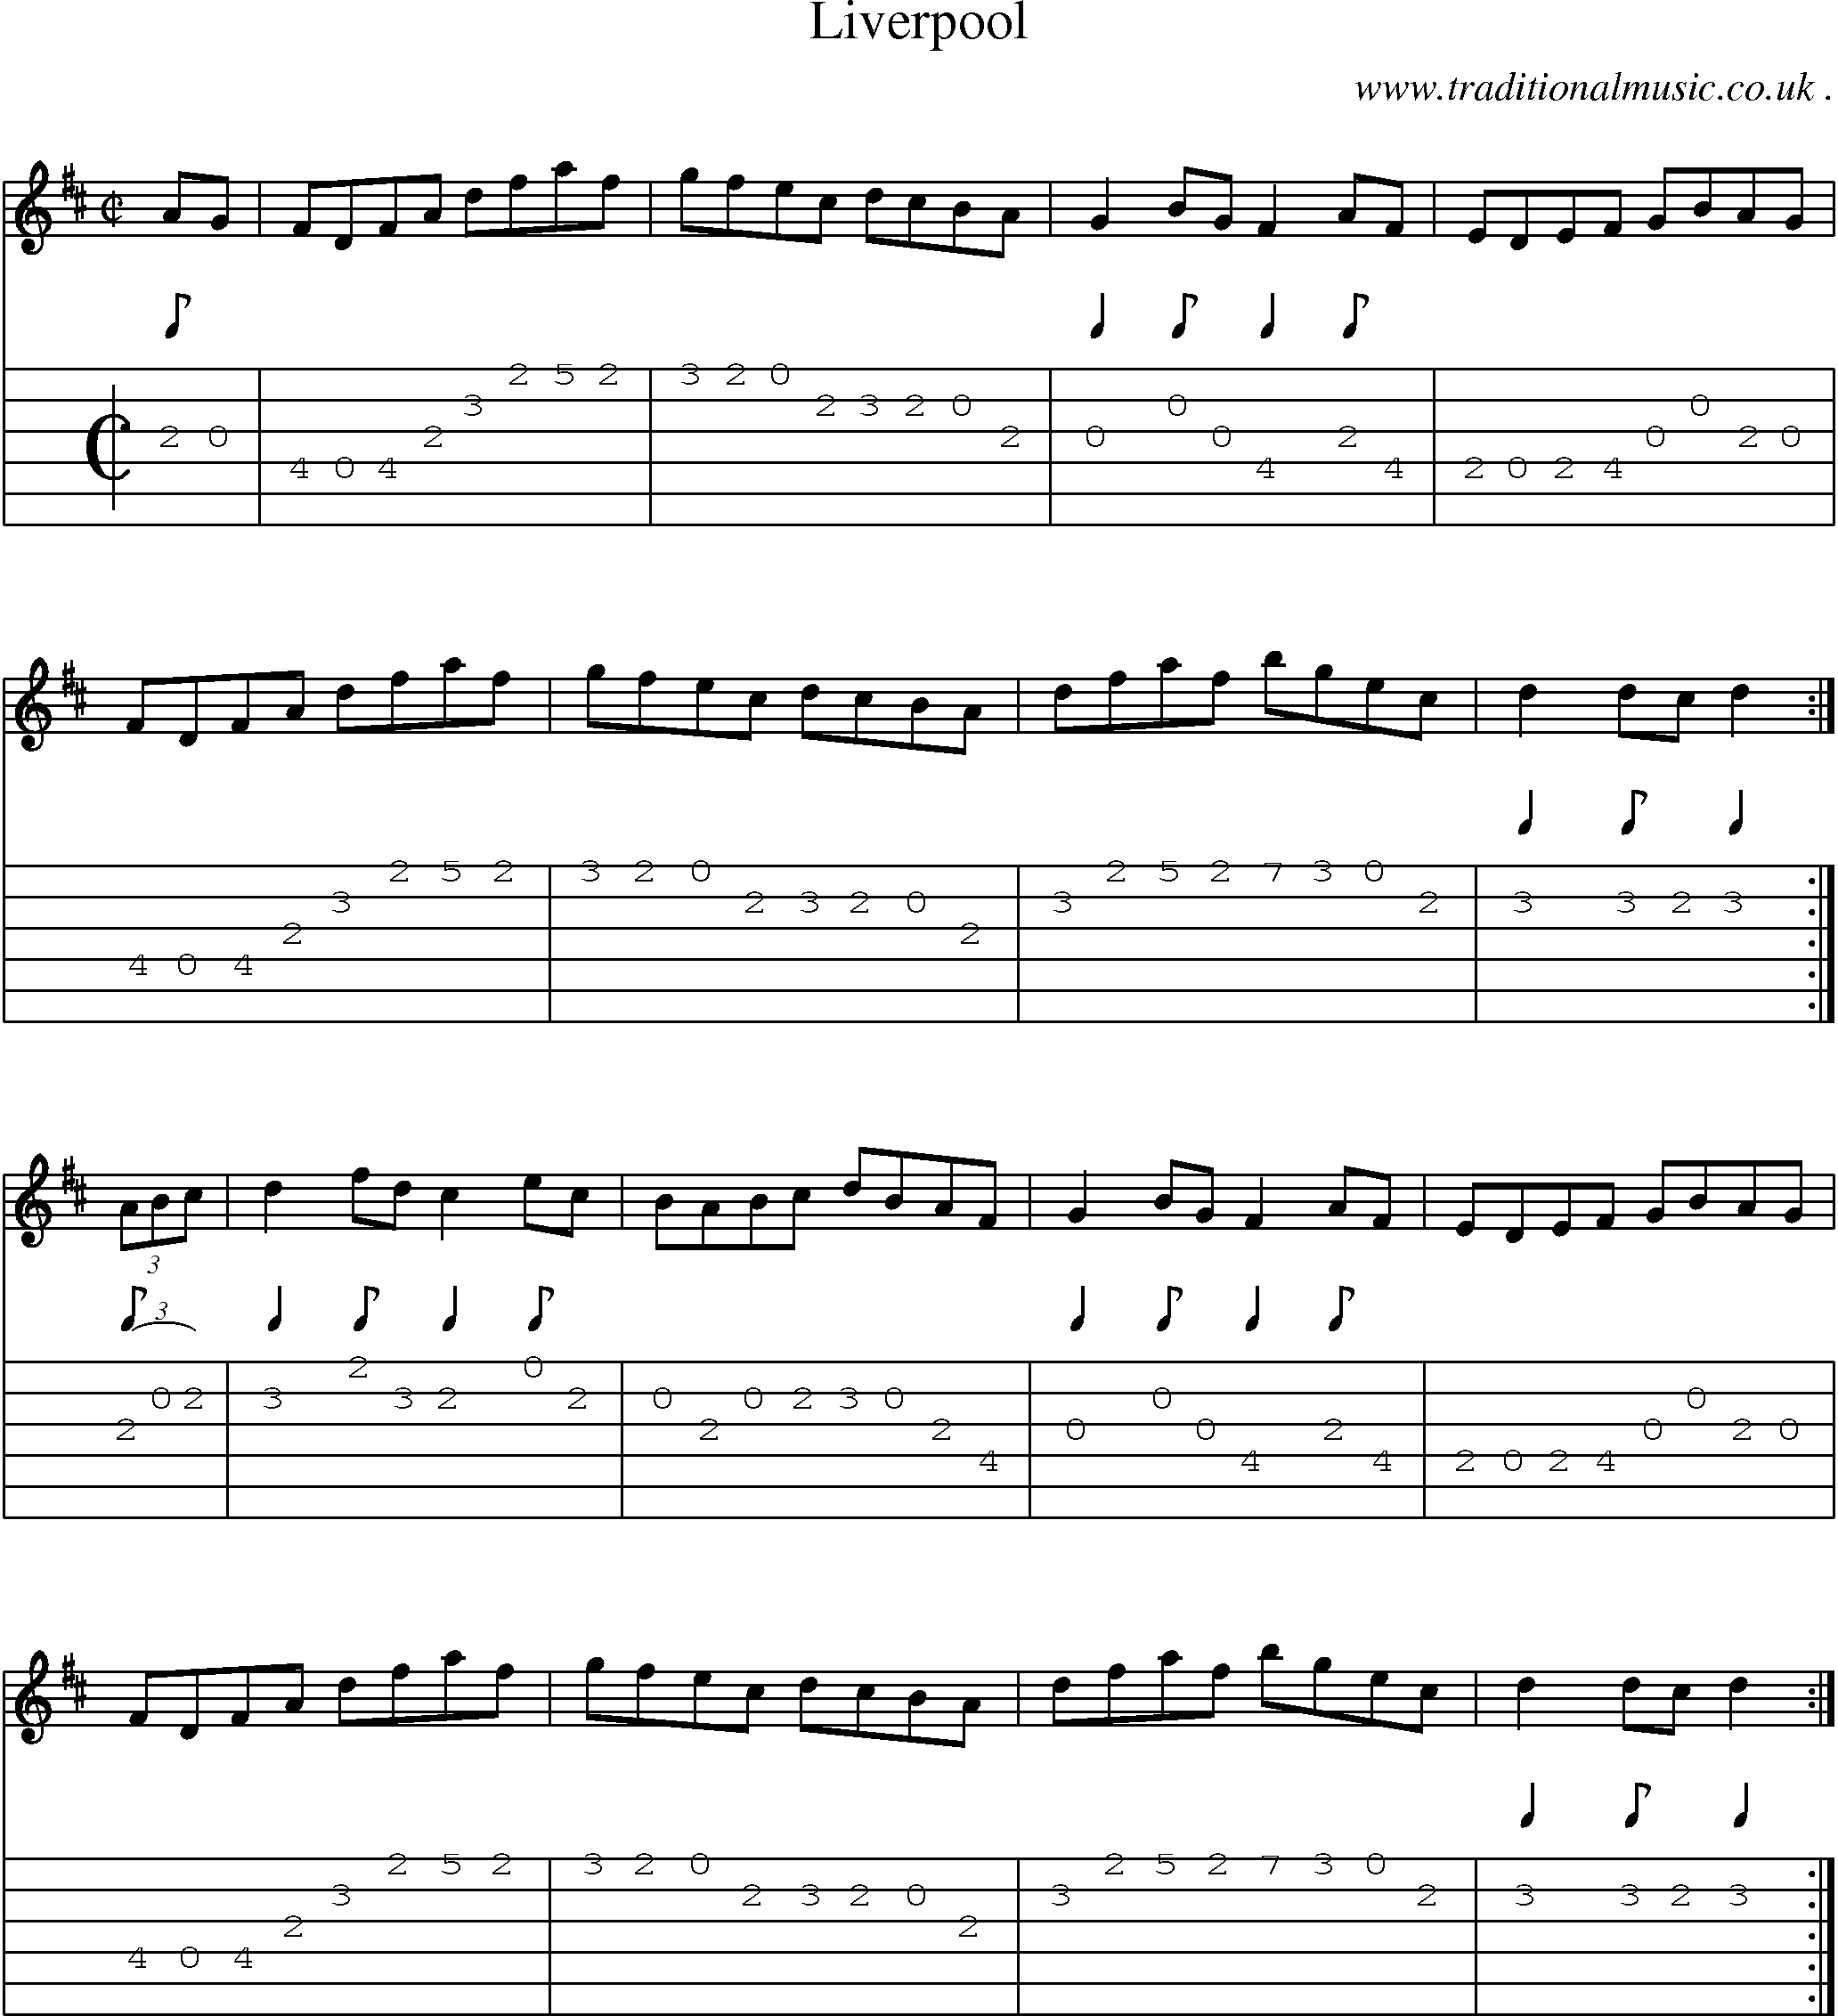 Sheet-Music and Guitar Tabs for Liverpool